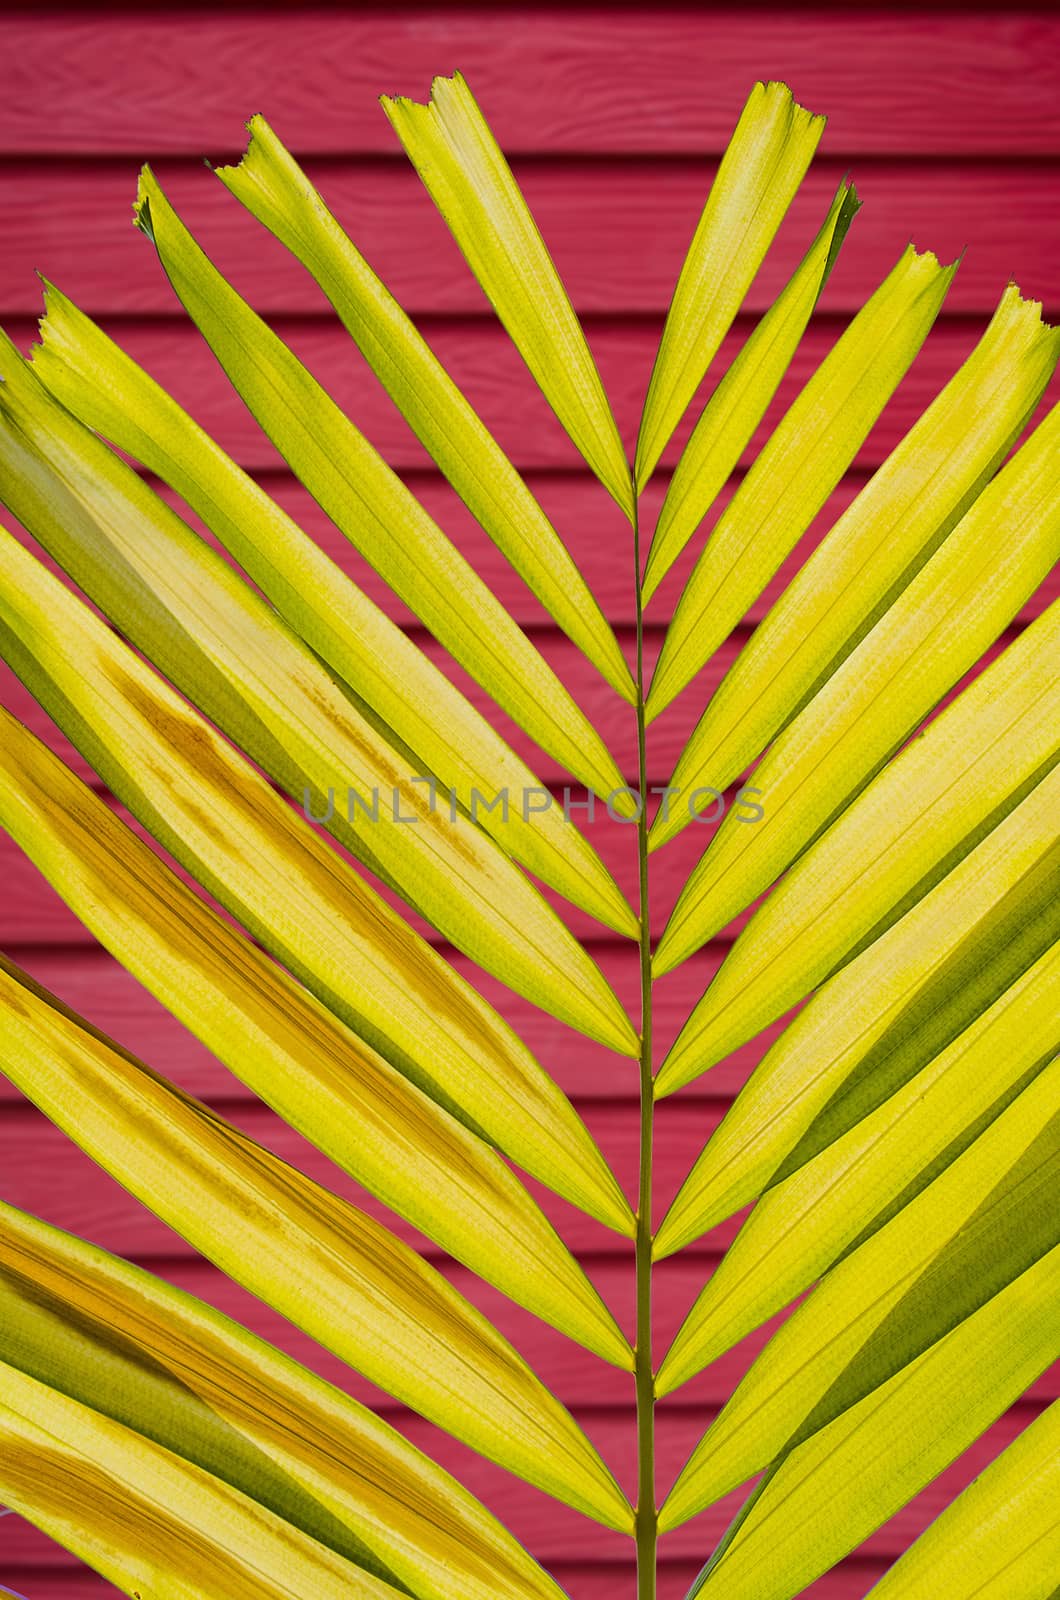 The Petal Palm Leaf on Blur Colorful Deep Wall Background